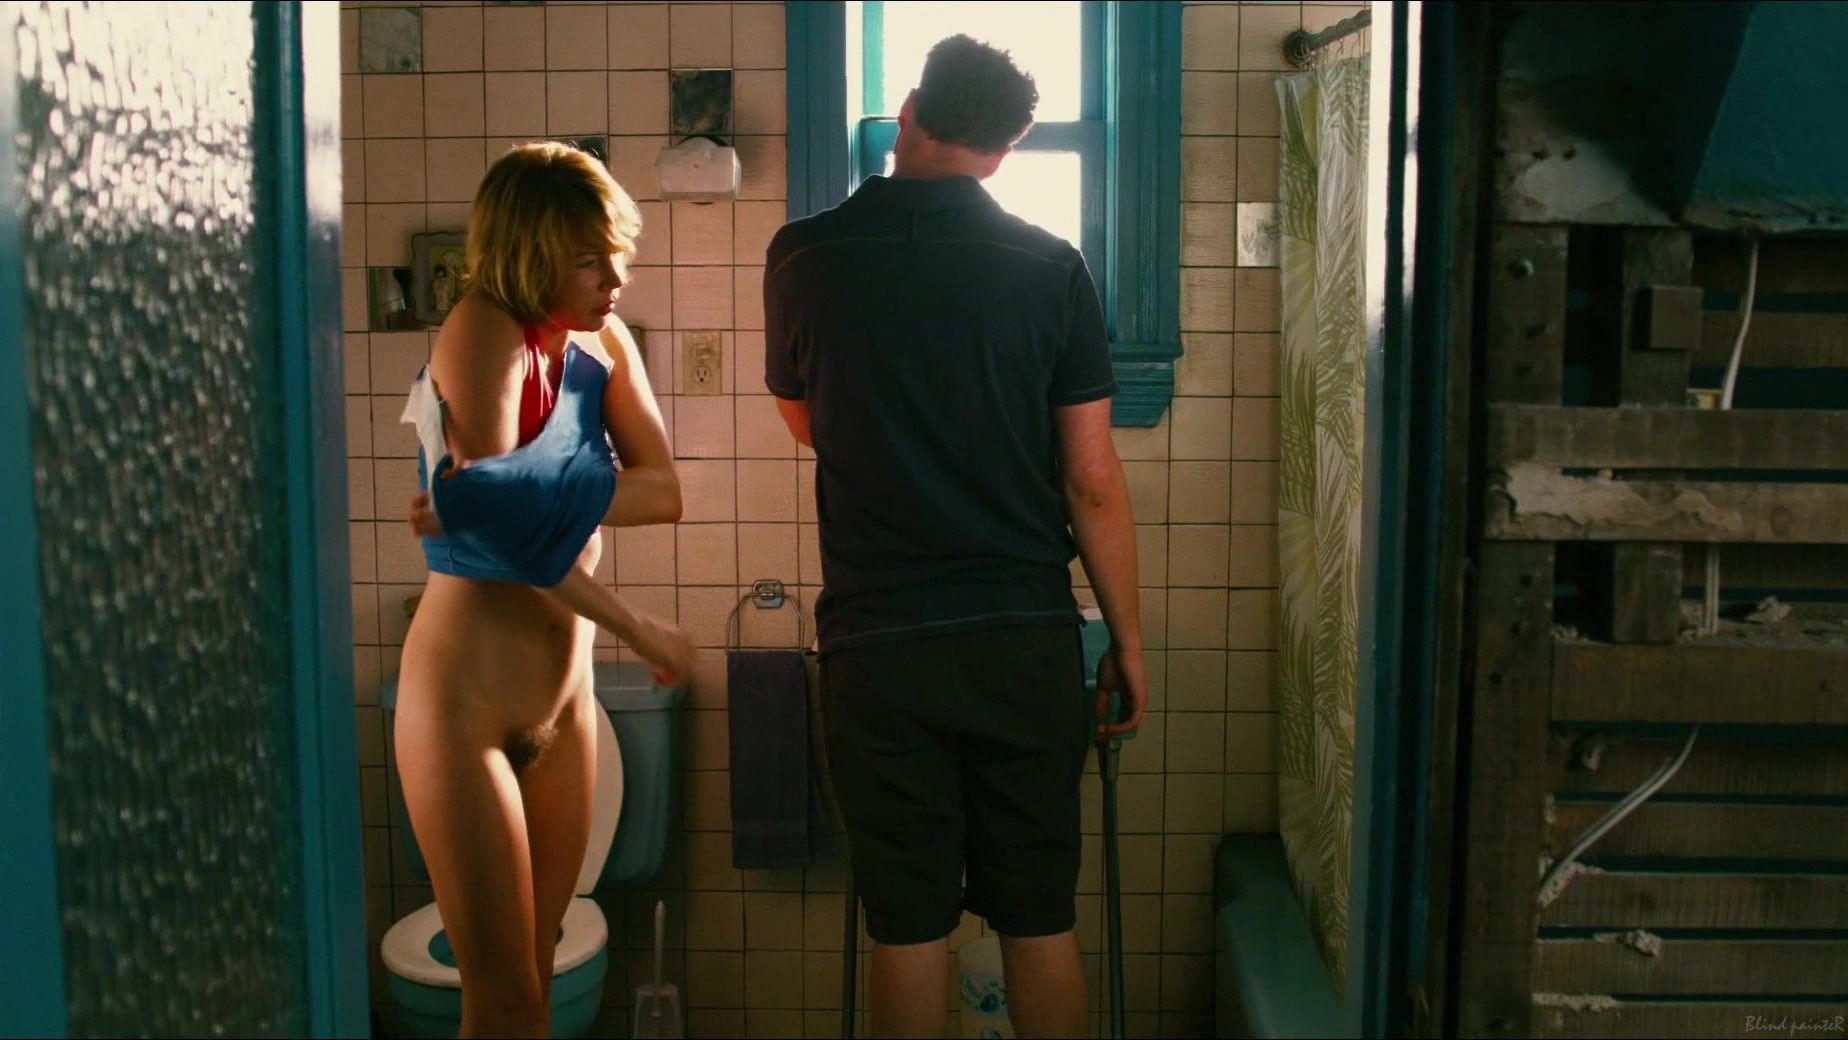 Amateur Michelle Williams nude - Take This Waltz (2011) BootyVote